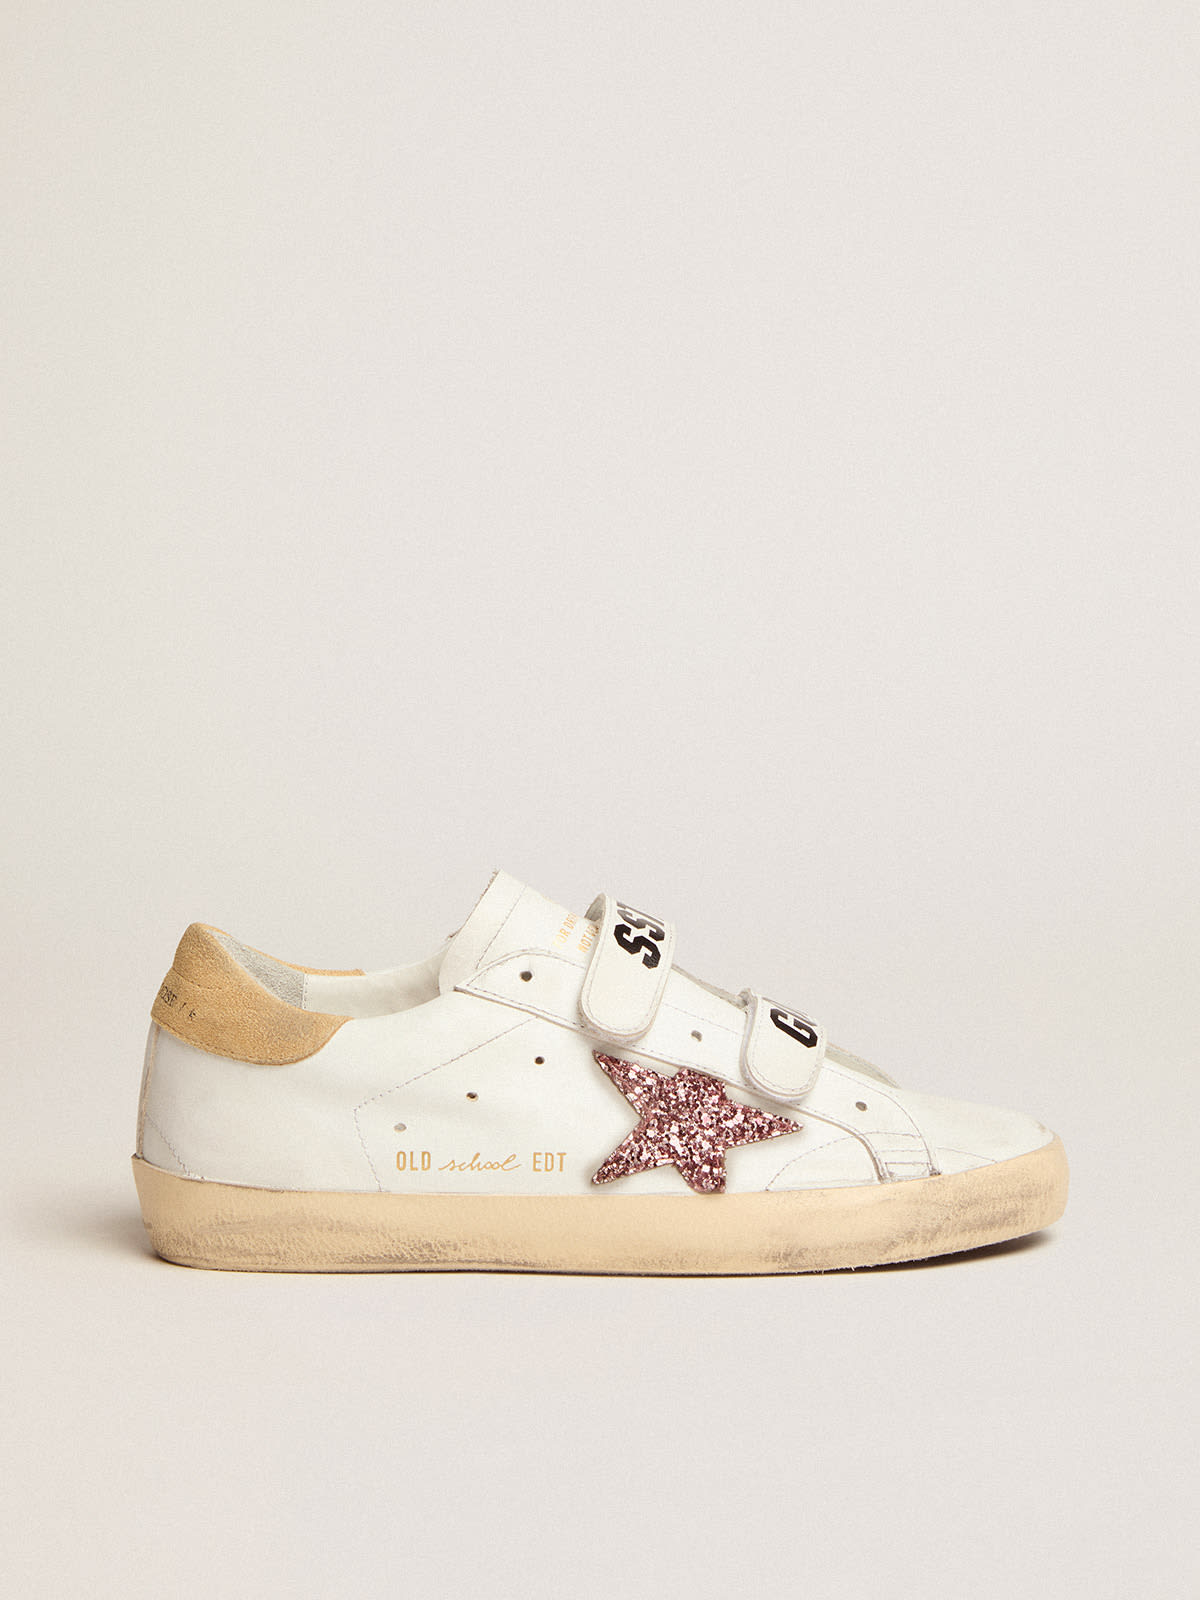 Golden Goose - Old School sneakers with pink glitter star and sand-colored suede heel tab in 